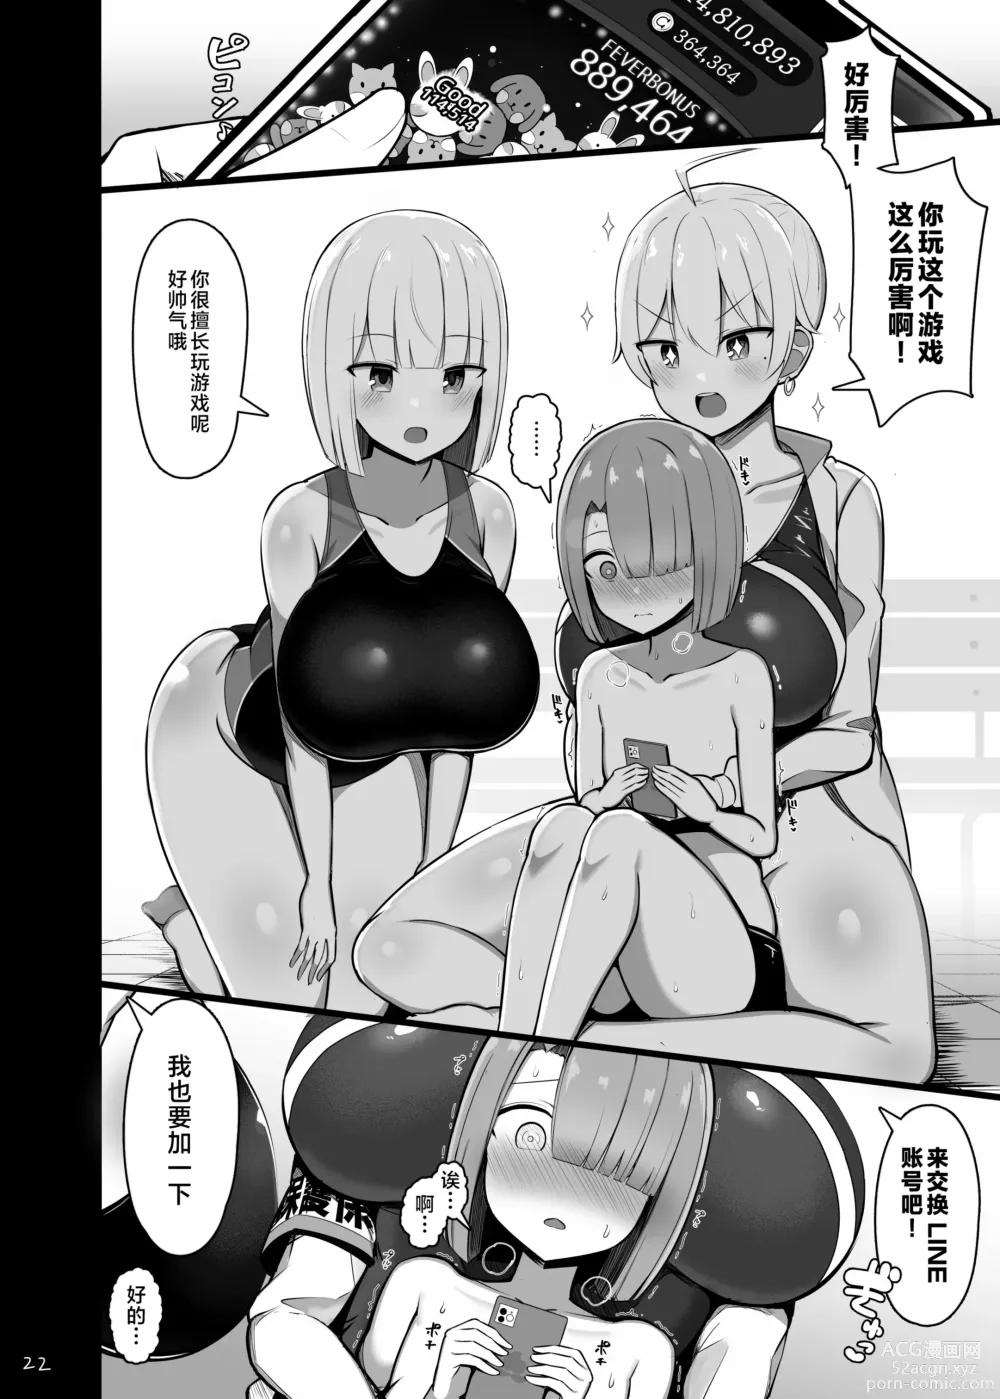 Page 22 of doujinshi 和姐姐与妈妈全力交配。